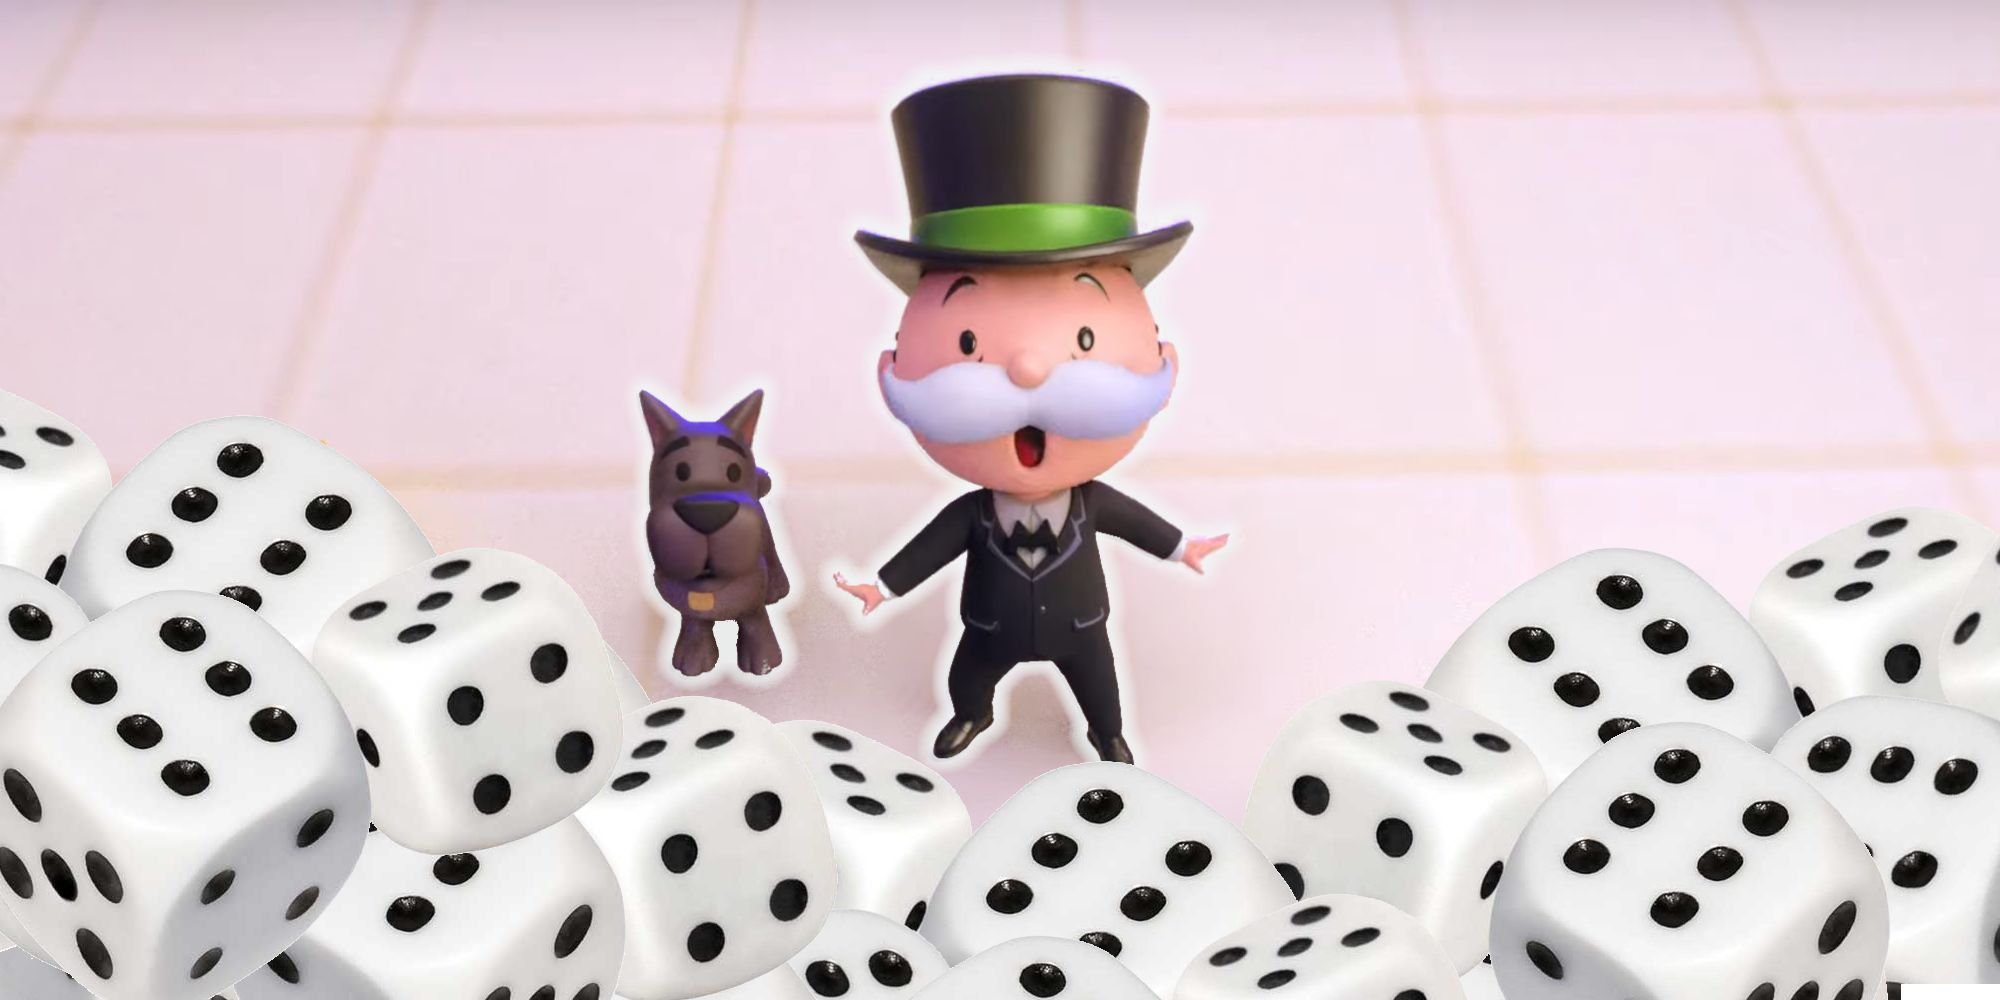 Monopoly Go, Mr. Monopoly and his dog surrounded by dice